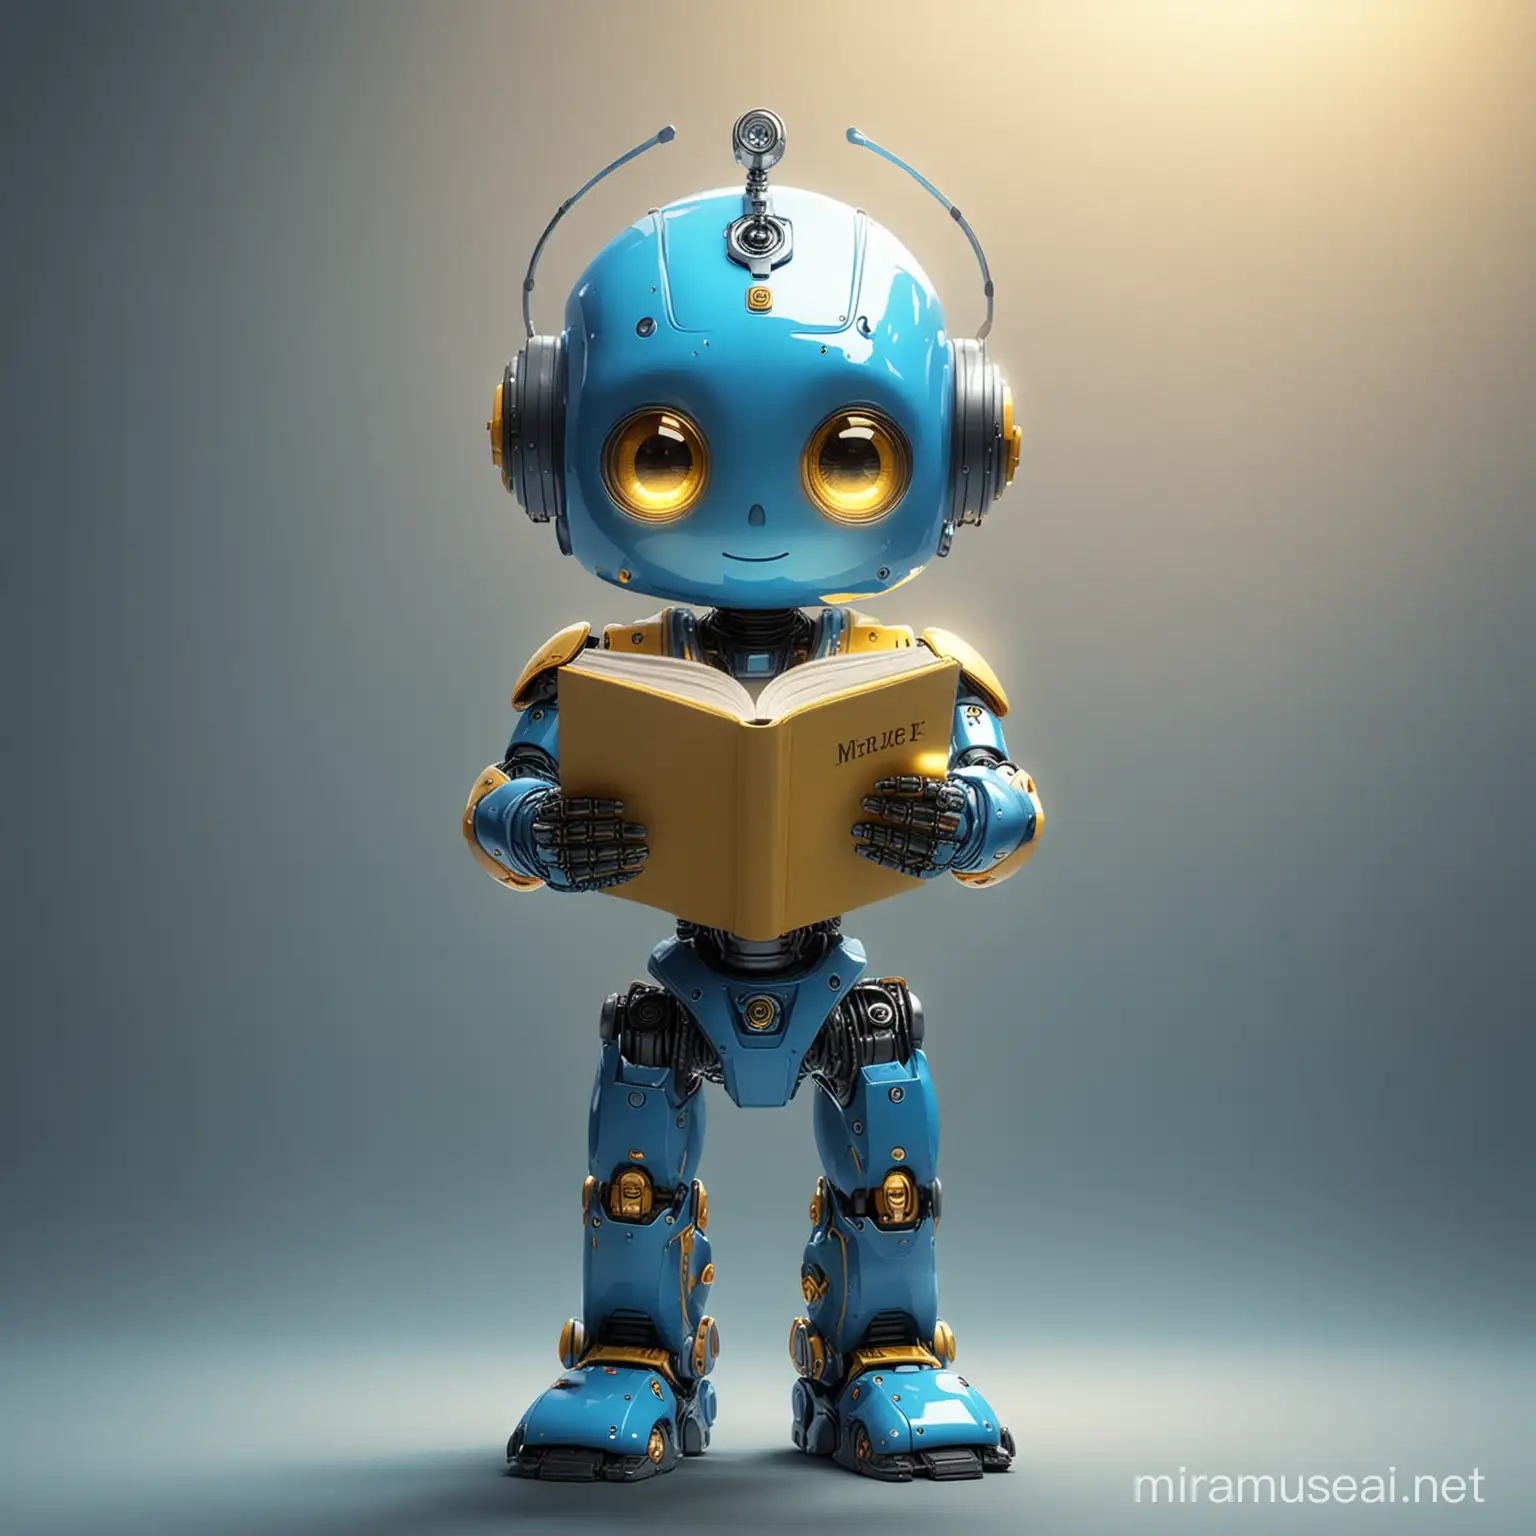 Blue Cute Robot Reading Book with Magical Light Emission